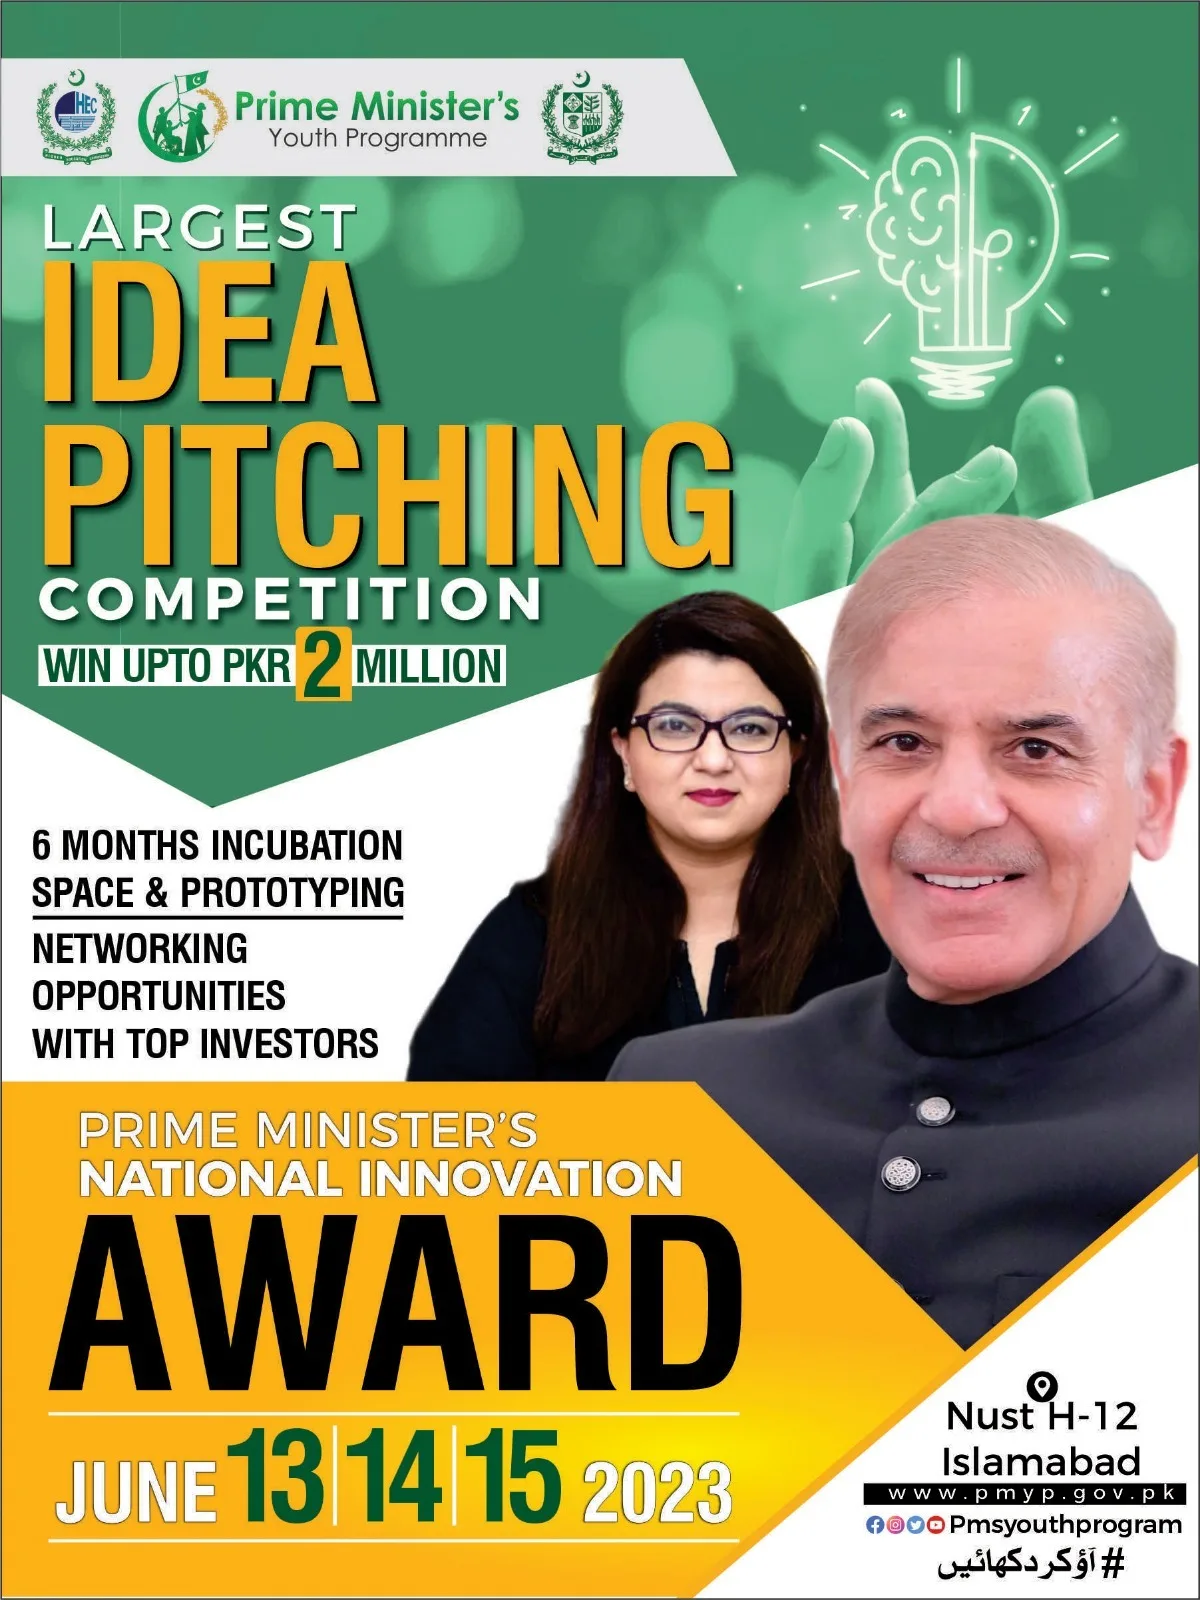 Pakistan’s biggest Idea Pitching Competition for Startups set to kick off